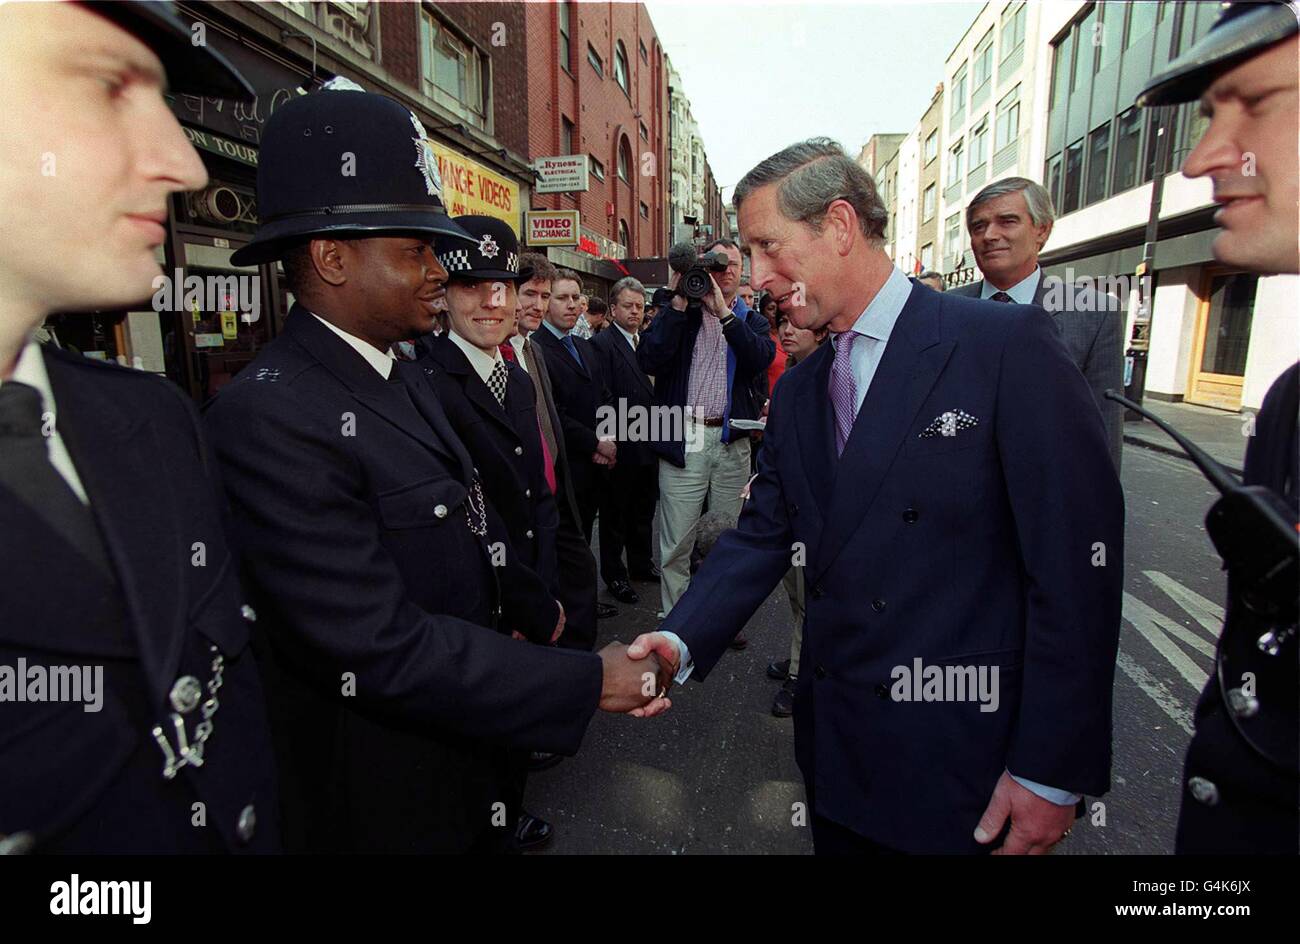 The Prince of Wales shakes hands with one of the first police constables to arrive at the scene of the nail bomb blast in the Admiral Duncan pub on April 30 1999, in which three people were killed and at least 72 were injured. Stock Photo